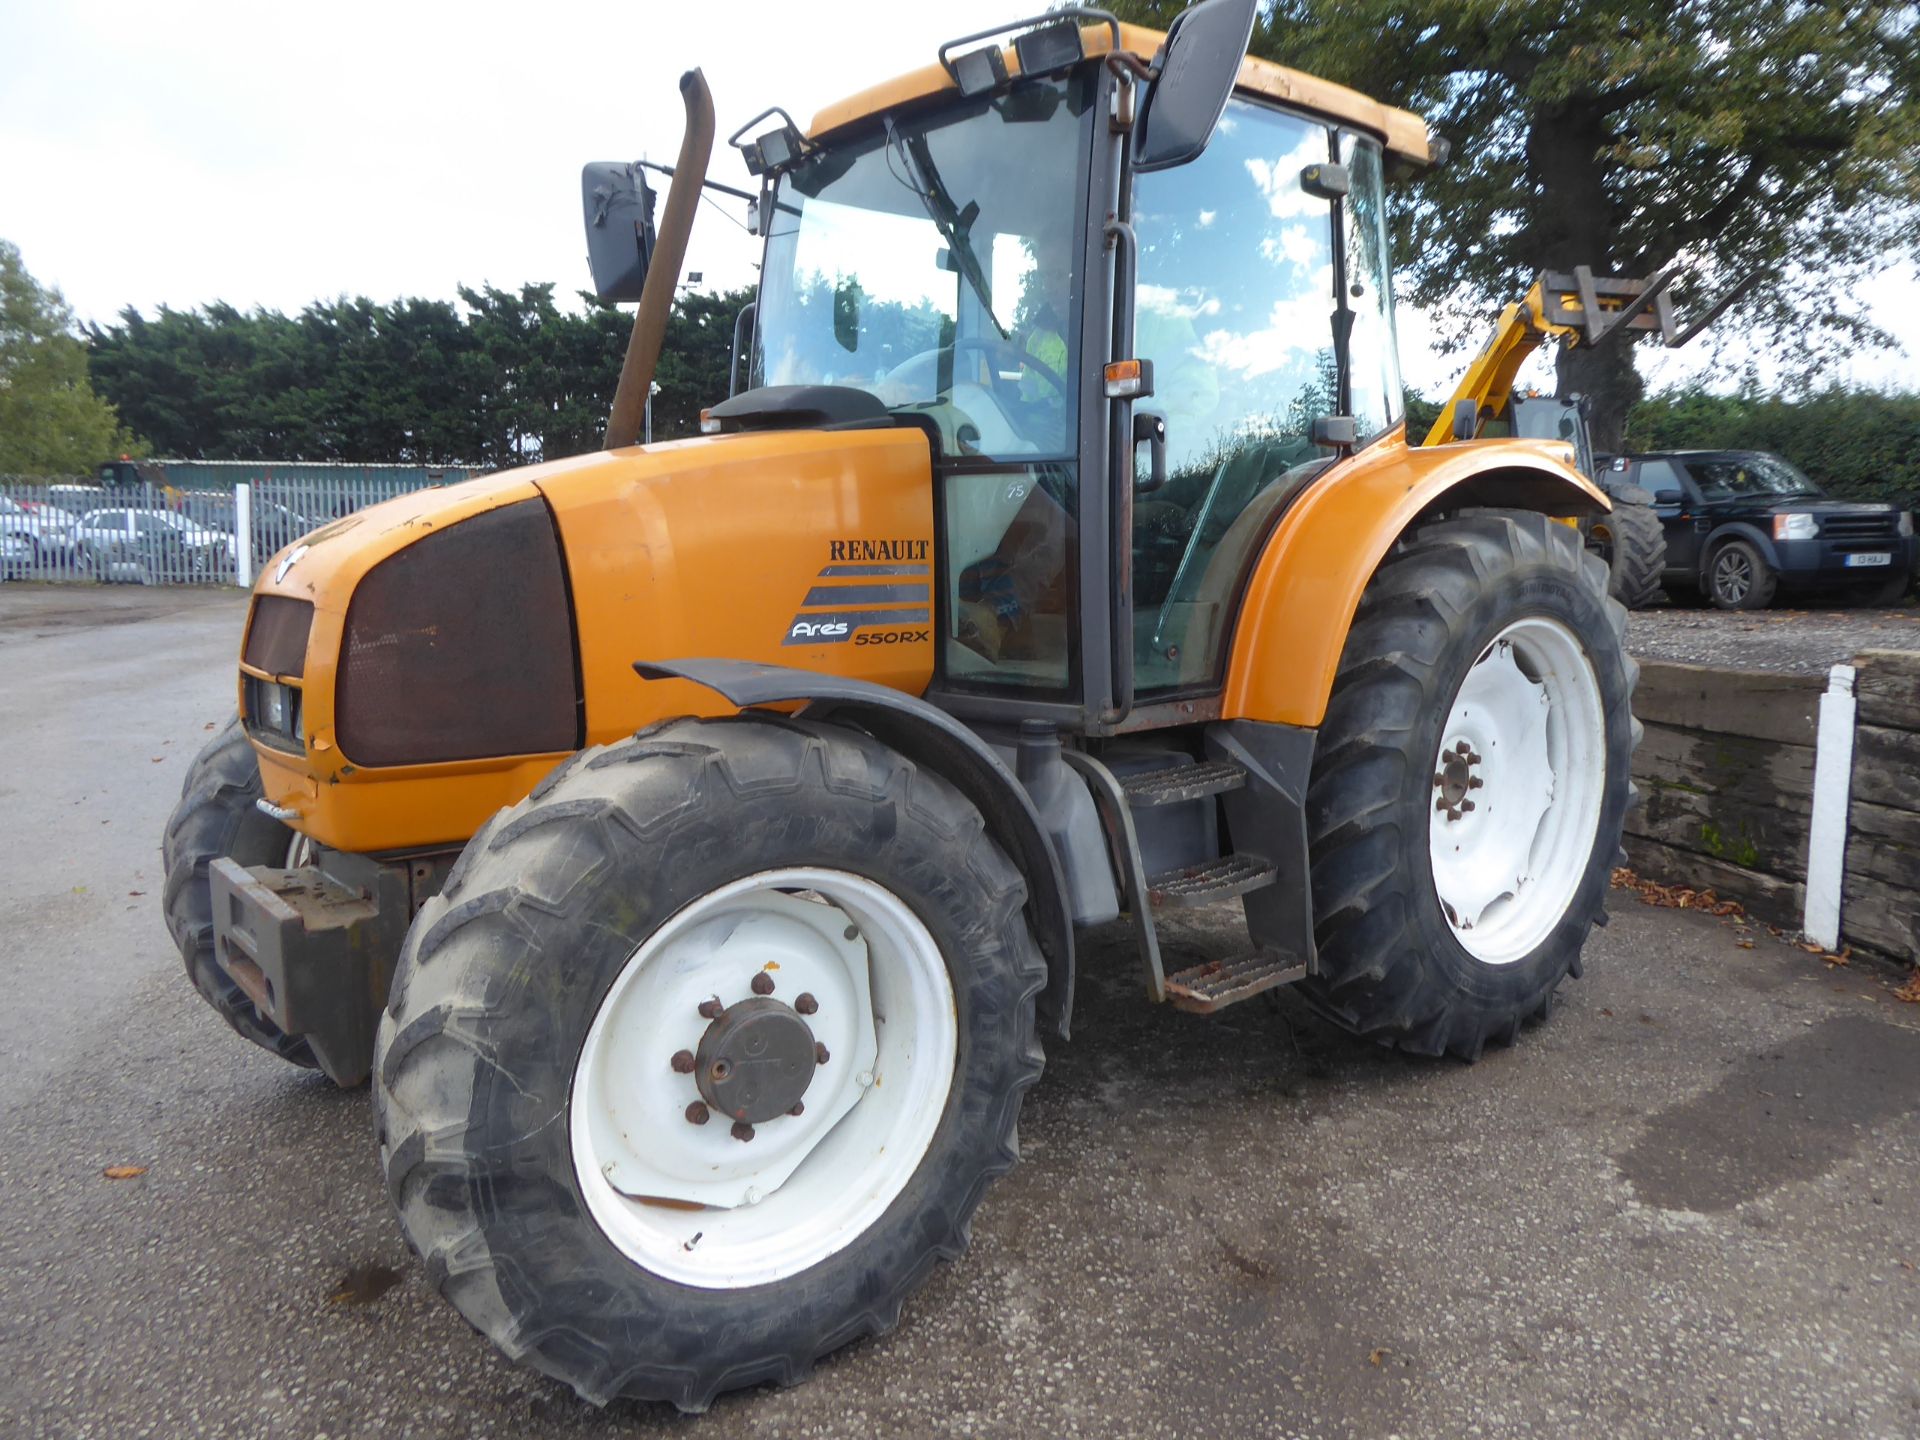 Renault Ares 550RX 4wd tractor, T1118 BHP